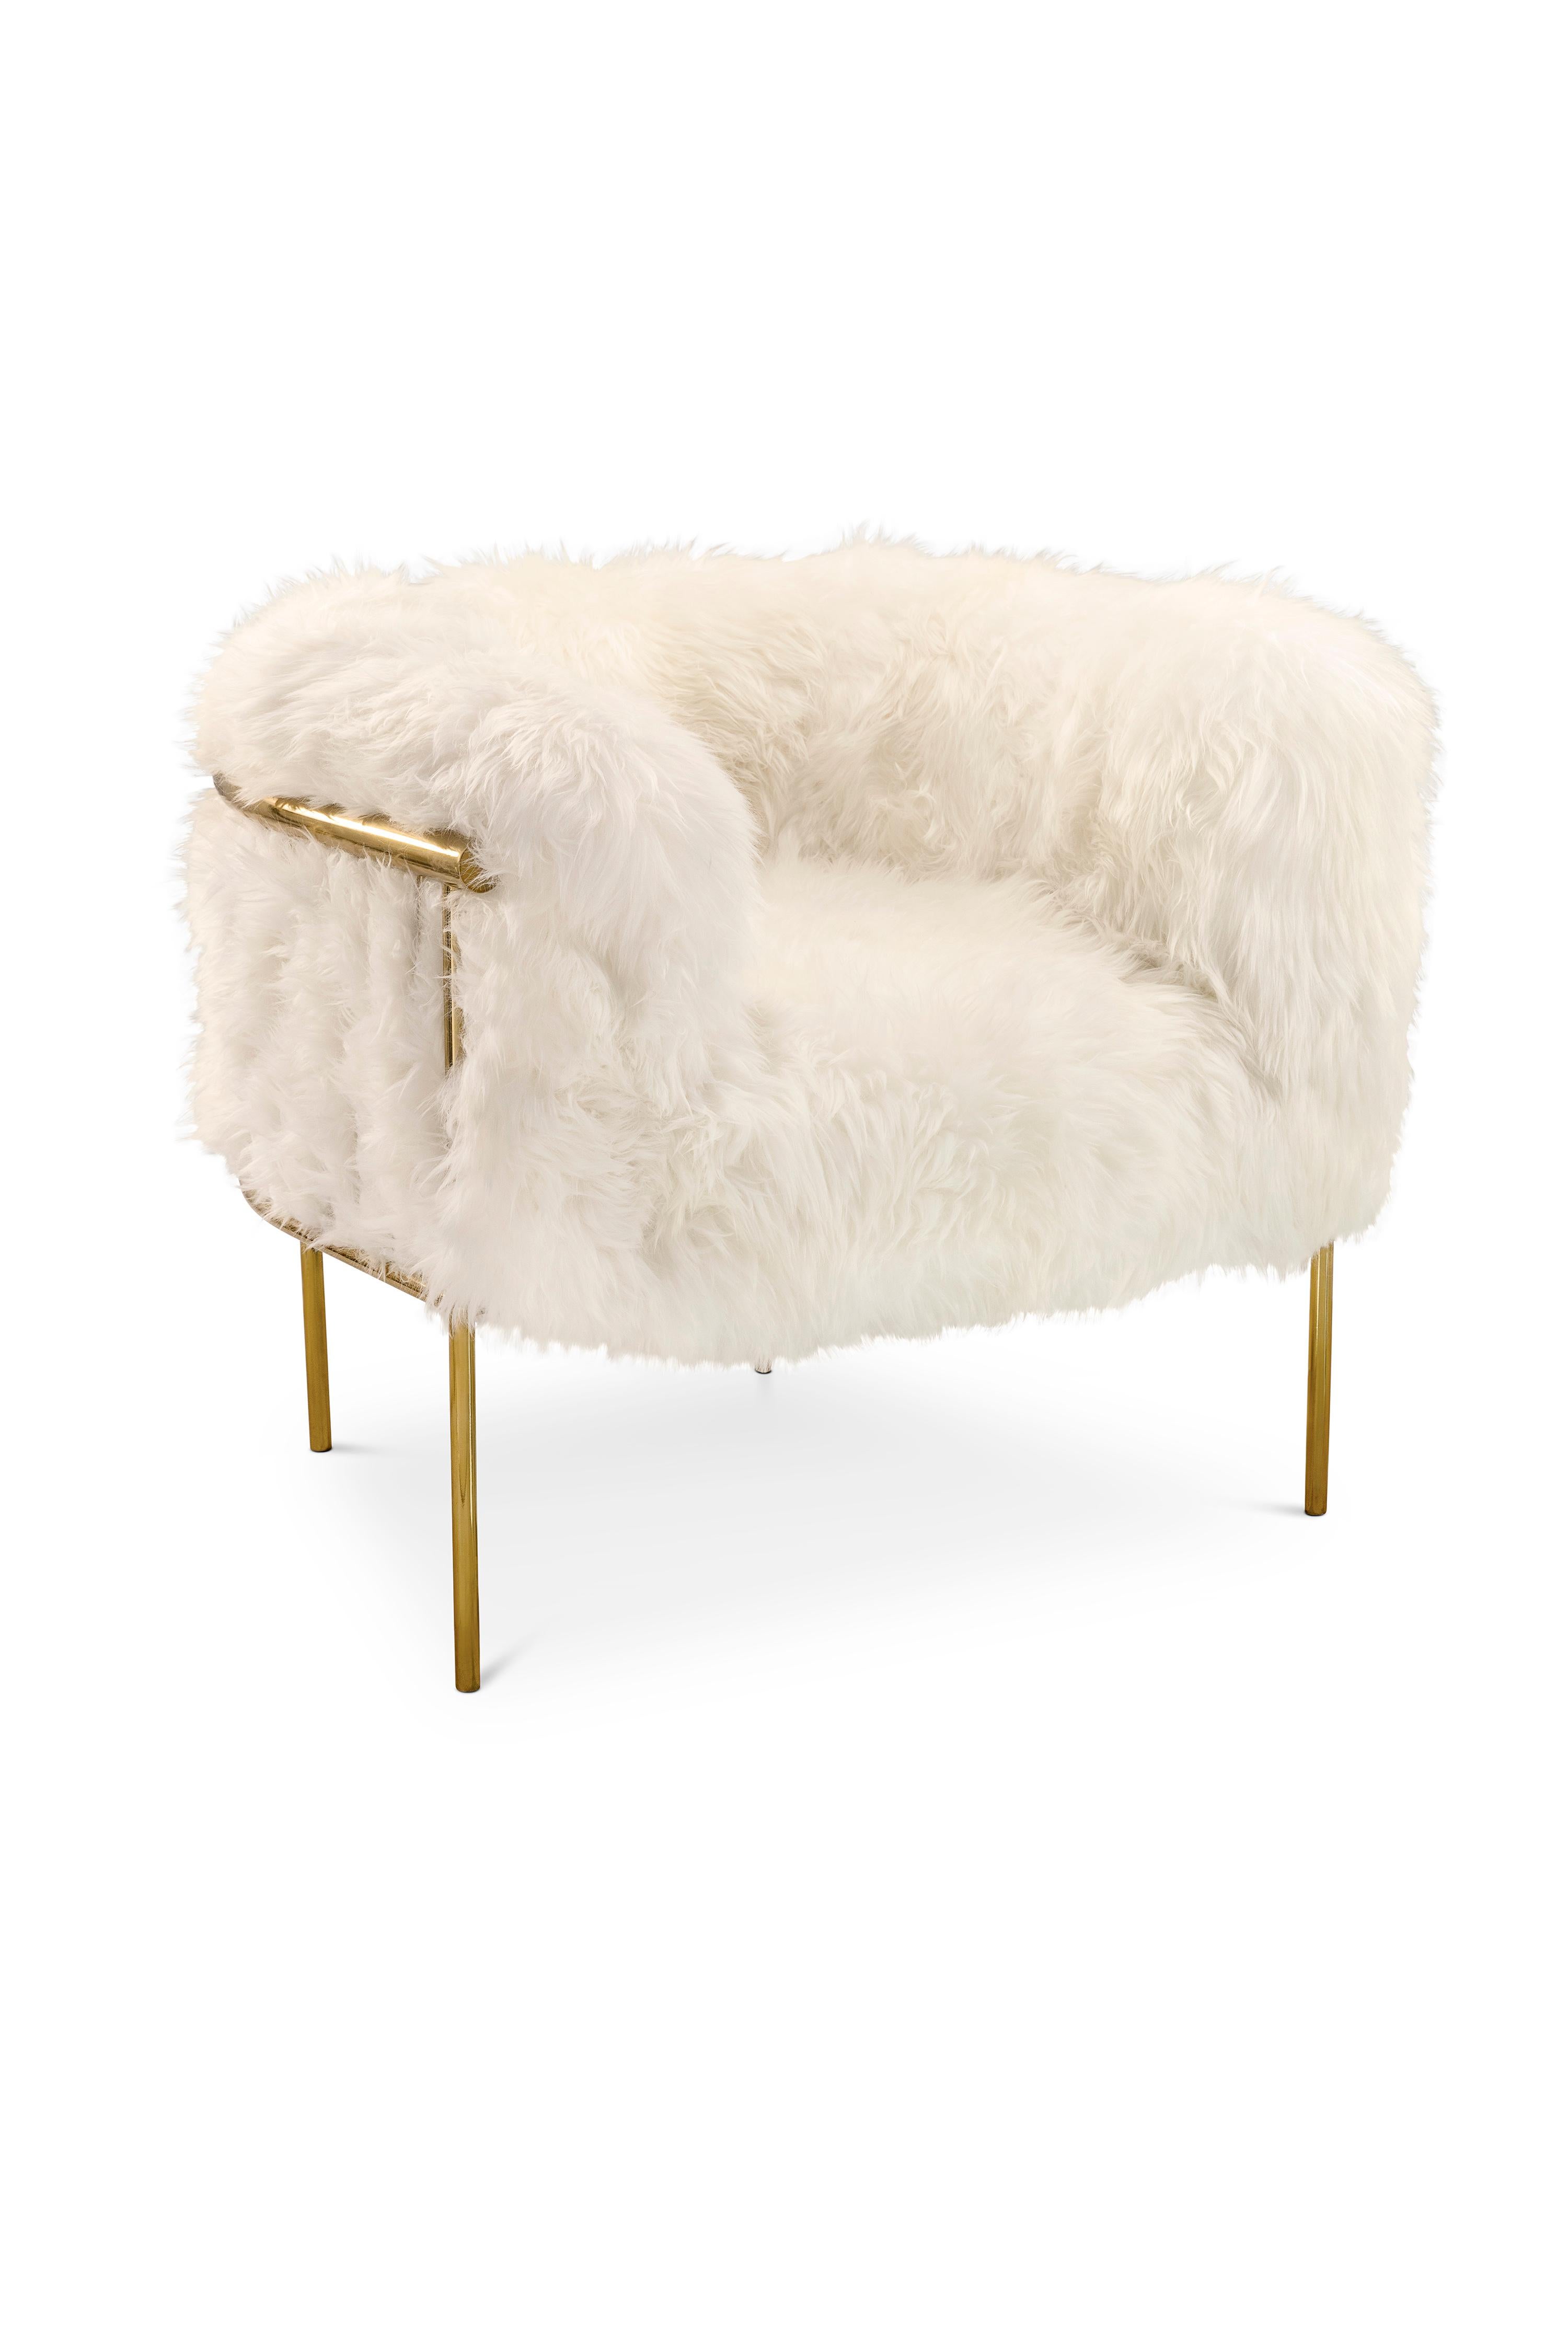 Hand-Crafted Coronum Sheepskin Gold Armchair by Artefatto Design Studio For Sale